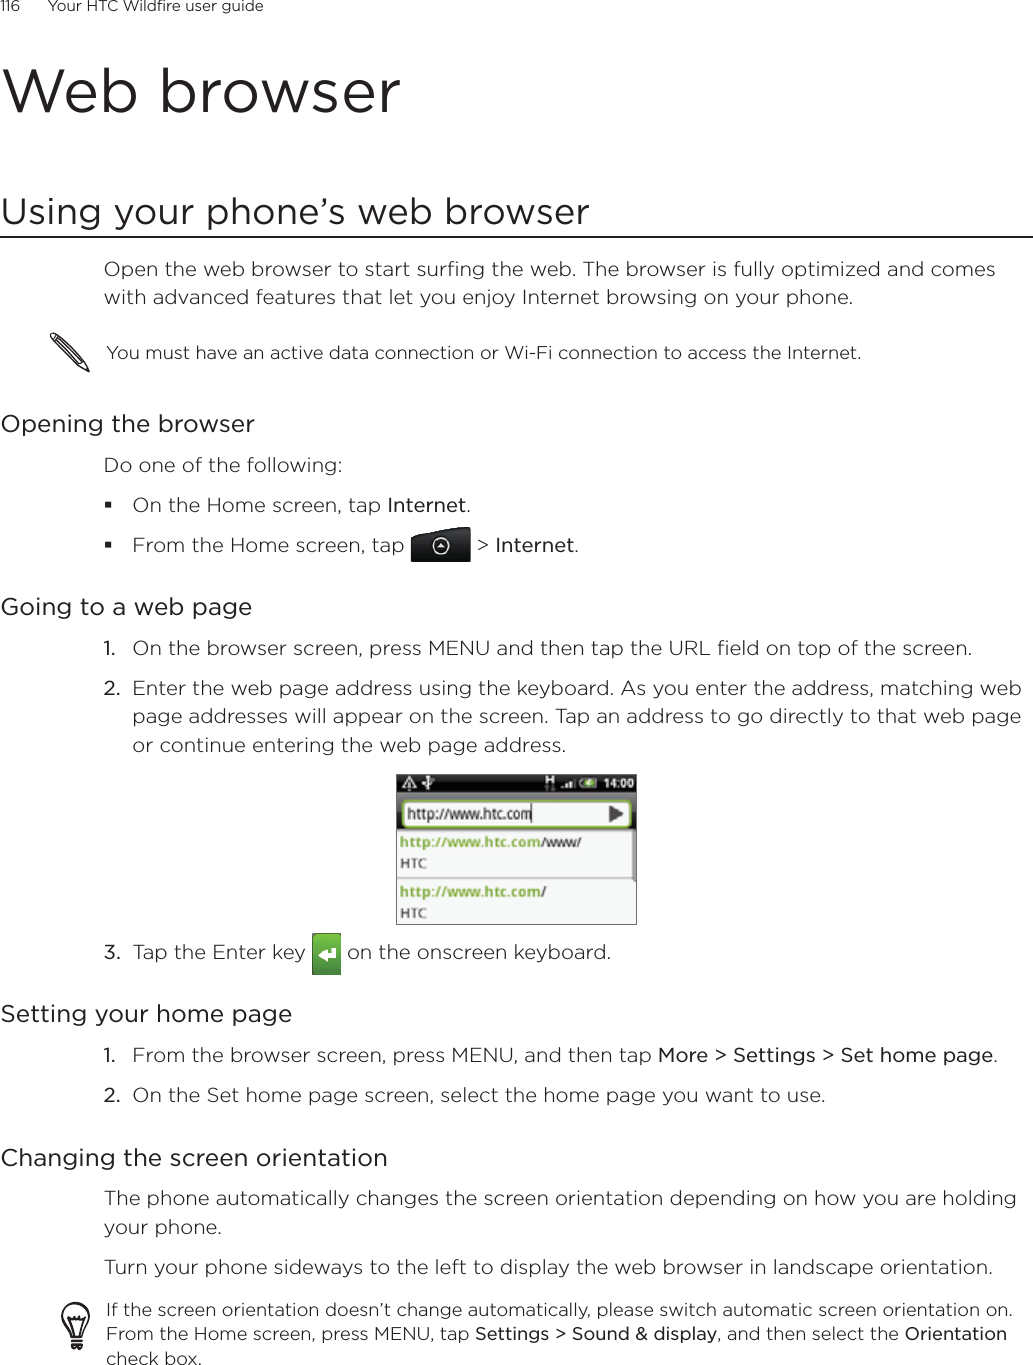 116      Your HTC Wildfire user guide      Web browserUsing your phone’s web browserOpen the web browser to start surfing the web. The browser is fully optimized and comes with advanced features that let you enjoy Internet browsing on your phone.You must have an active data connection or Wi-Fi connection to access the Internet.Opening the browserDo one of the following:On the Home screen, tap Internet.From the Home screen, tap  &gt; Internet.Going to a web pageOn the browser screen, press MENU and then tap the URL field on top of the screen.2.  Enter the web page address using the keyboard. As you enter the address, matching web page addresses will appear on the screen. Tap an address to go directly to that web page or continue entering the web page address.3.  Tap the Enter key   on the onscreen keyboard.Setting your home pageFrom the browser screen, press MENU, and then tap More &gt; Settings &gt; Set home page.On the Set home page screen, select the home page you want to use.Changing the screen orientationThe phone automatically changes the screen orientation depending on how you are holding your phone. Turn your phone sideways to the left to display the web browser in landscape orientation.If the screen orientation doesn’t change automatically, please switch automatic screen orientation on. From the Home screen, press MENU, tap Settings &gt; Sound &amp; display, and then select the Orientation check box.1.1.2.